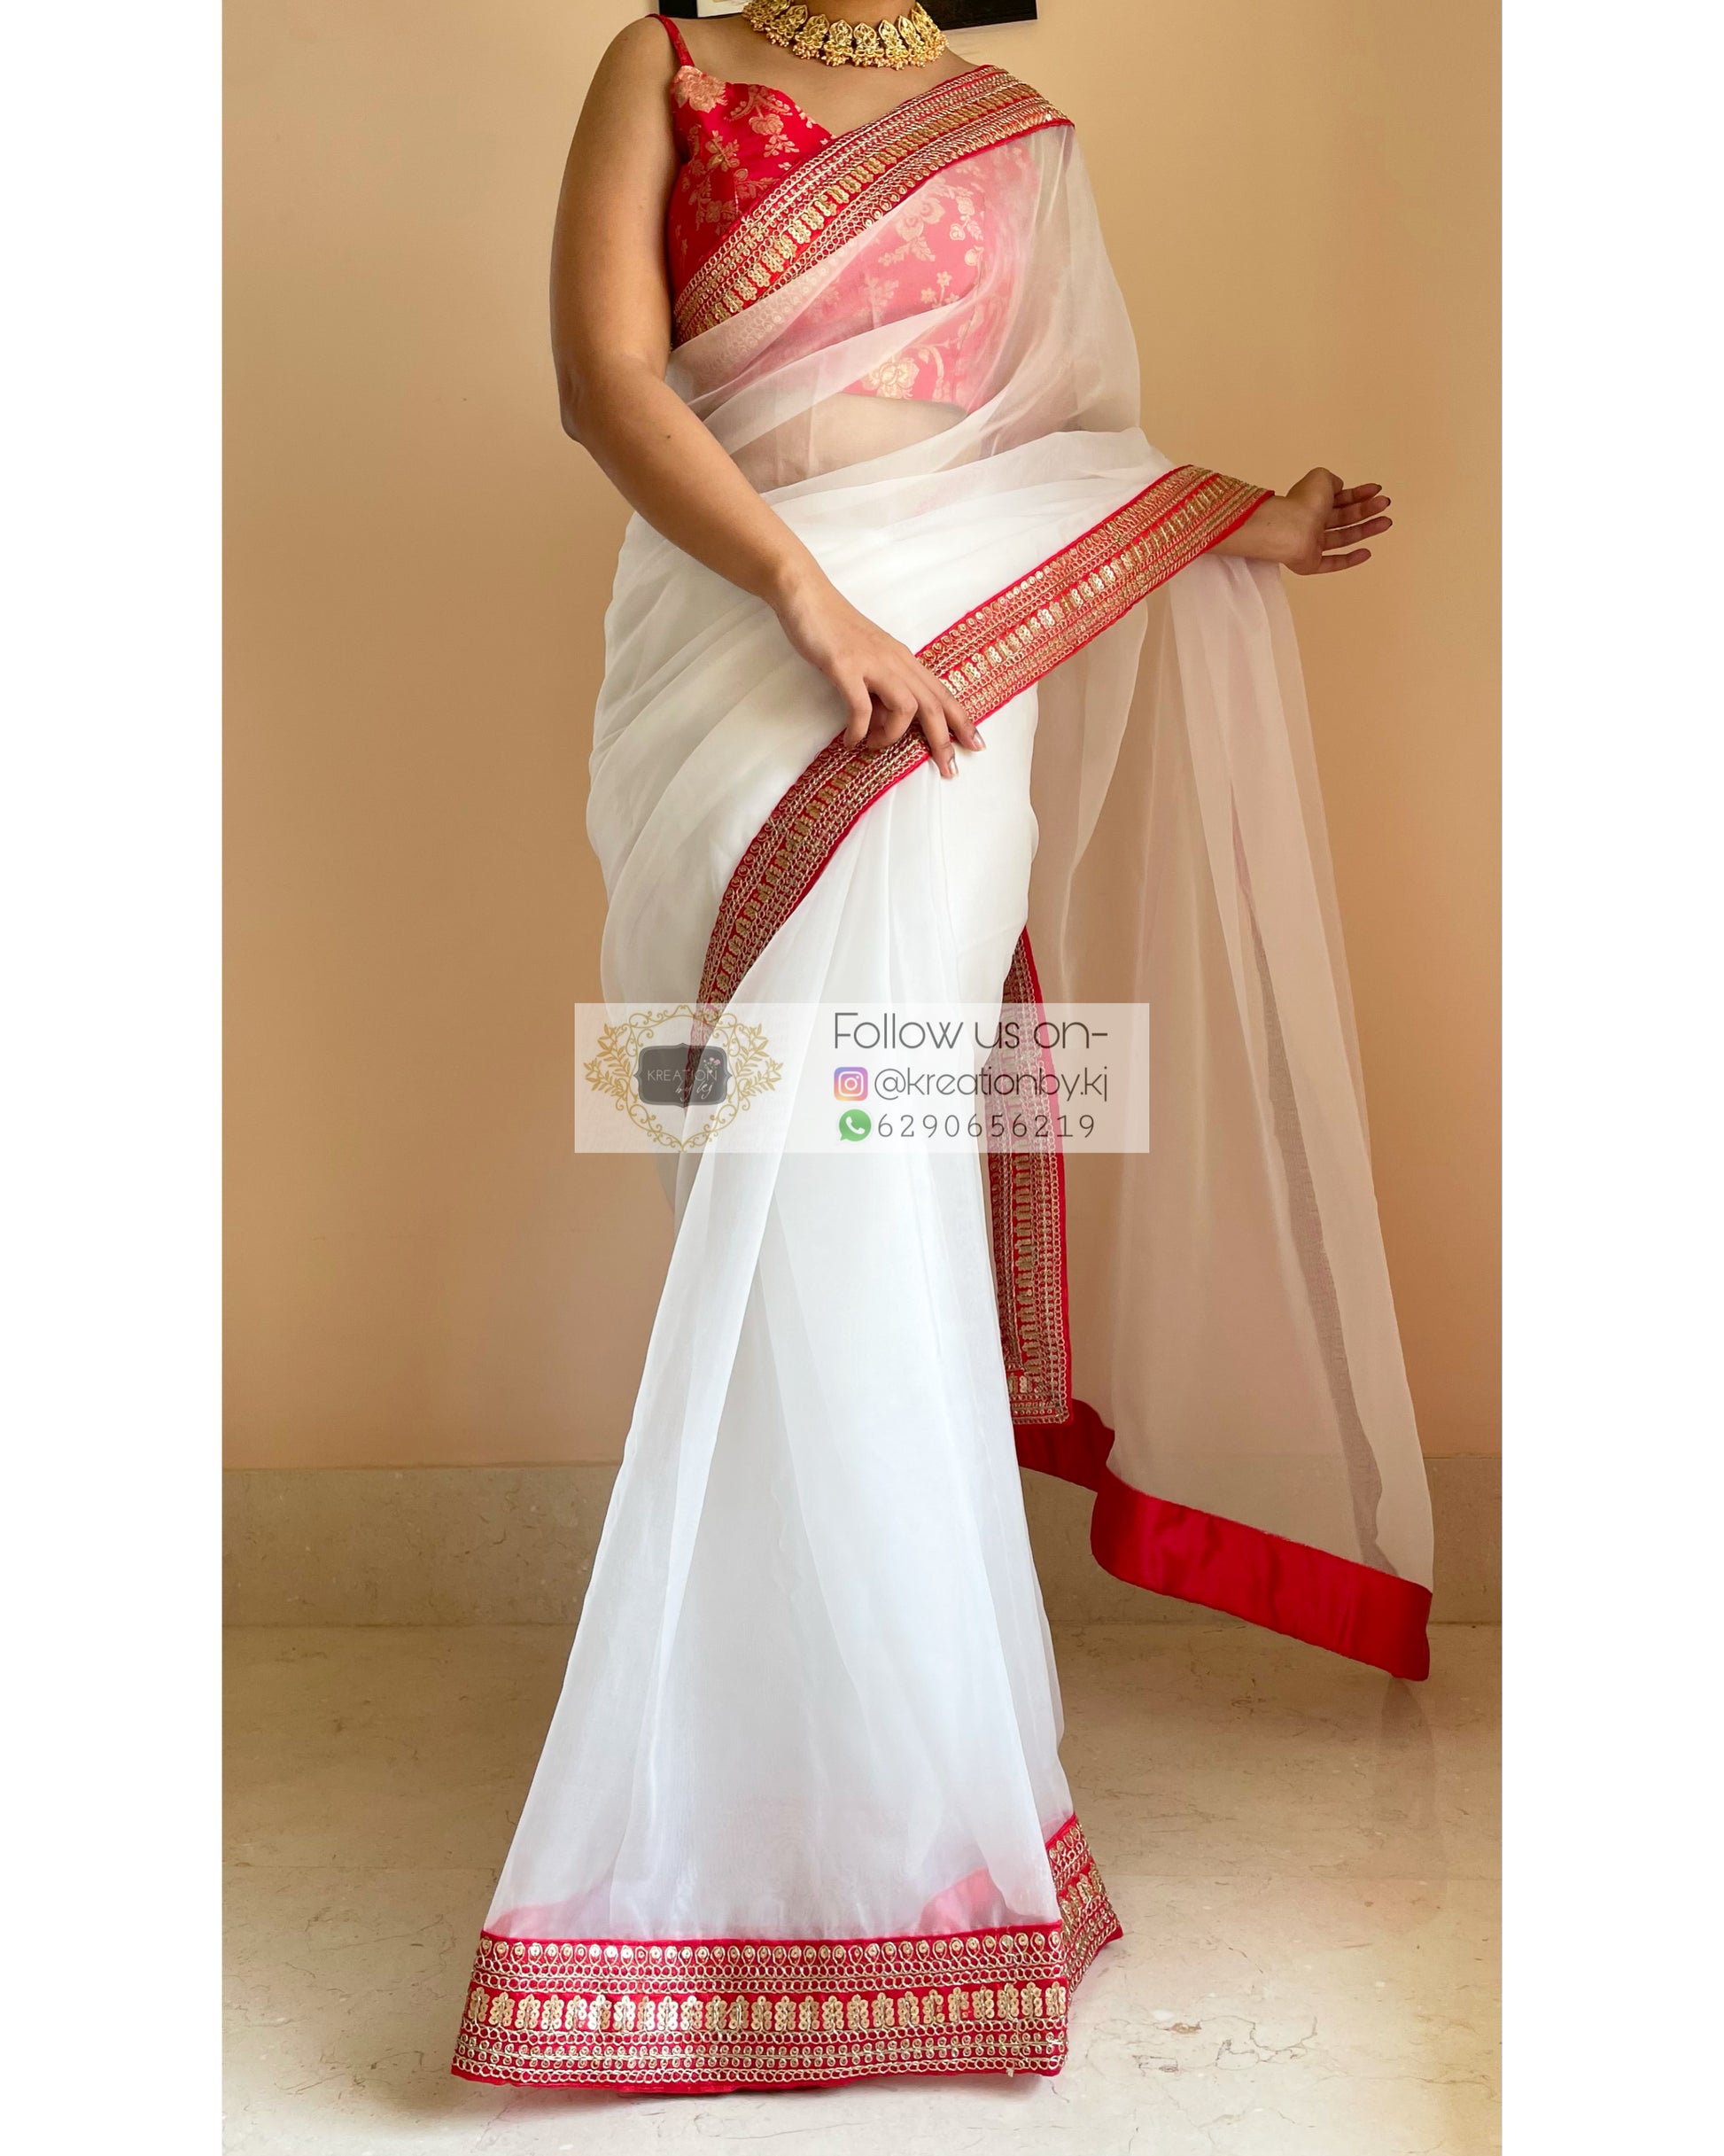 White Organza Saree with Red Border - kreationbykj